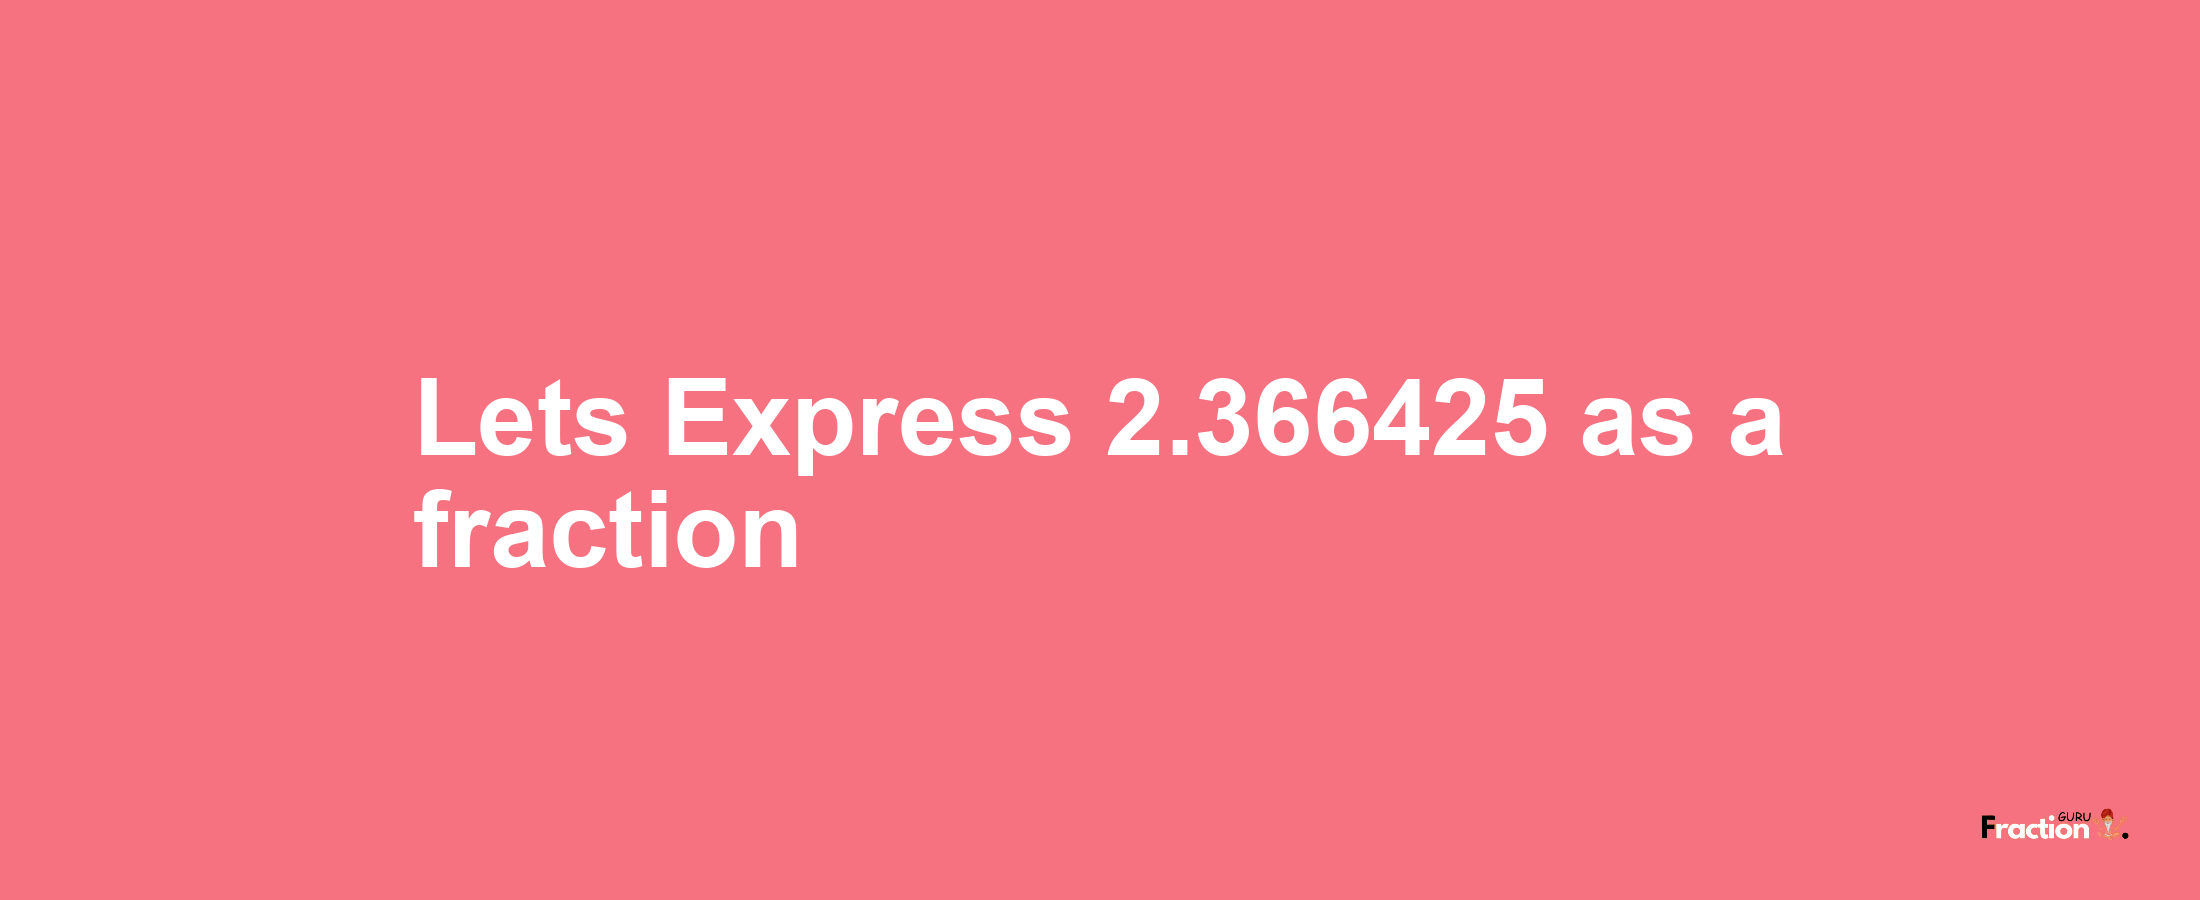 Lets Express 2.366425 as afraction